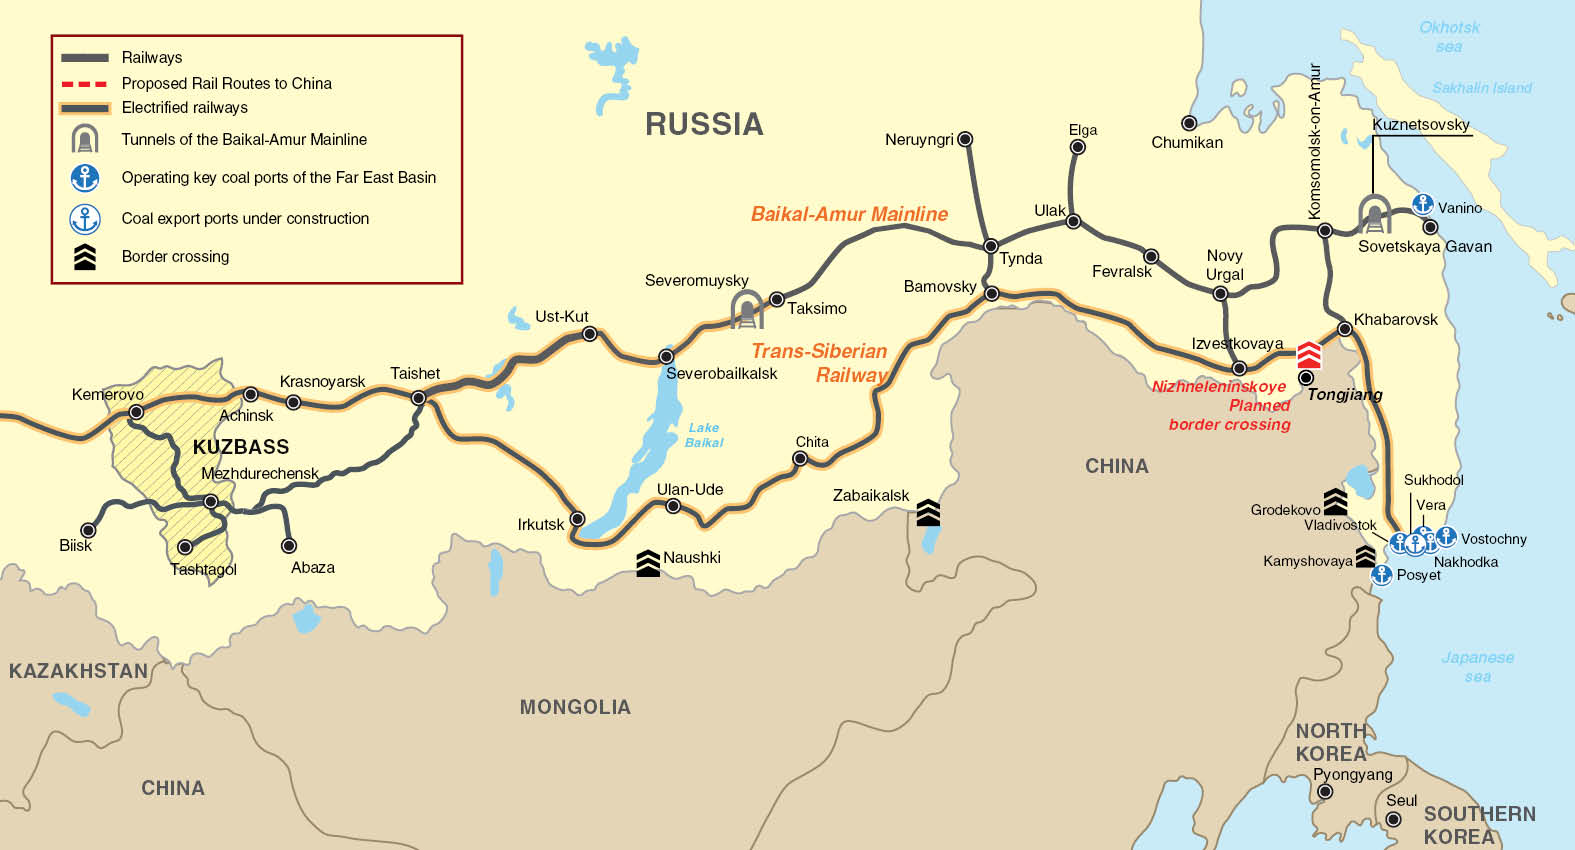 railway-border-crossing-between-Russia-and-China